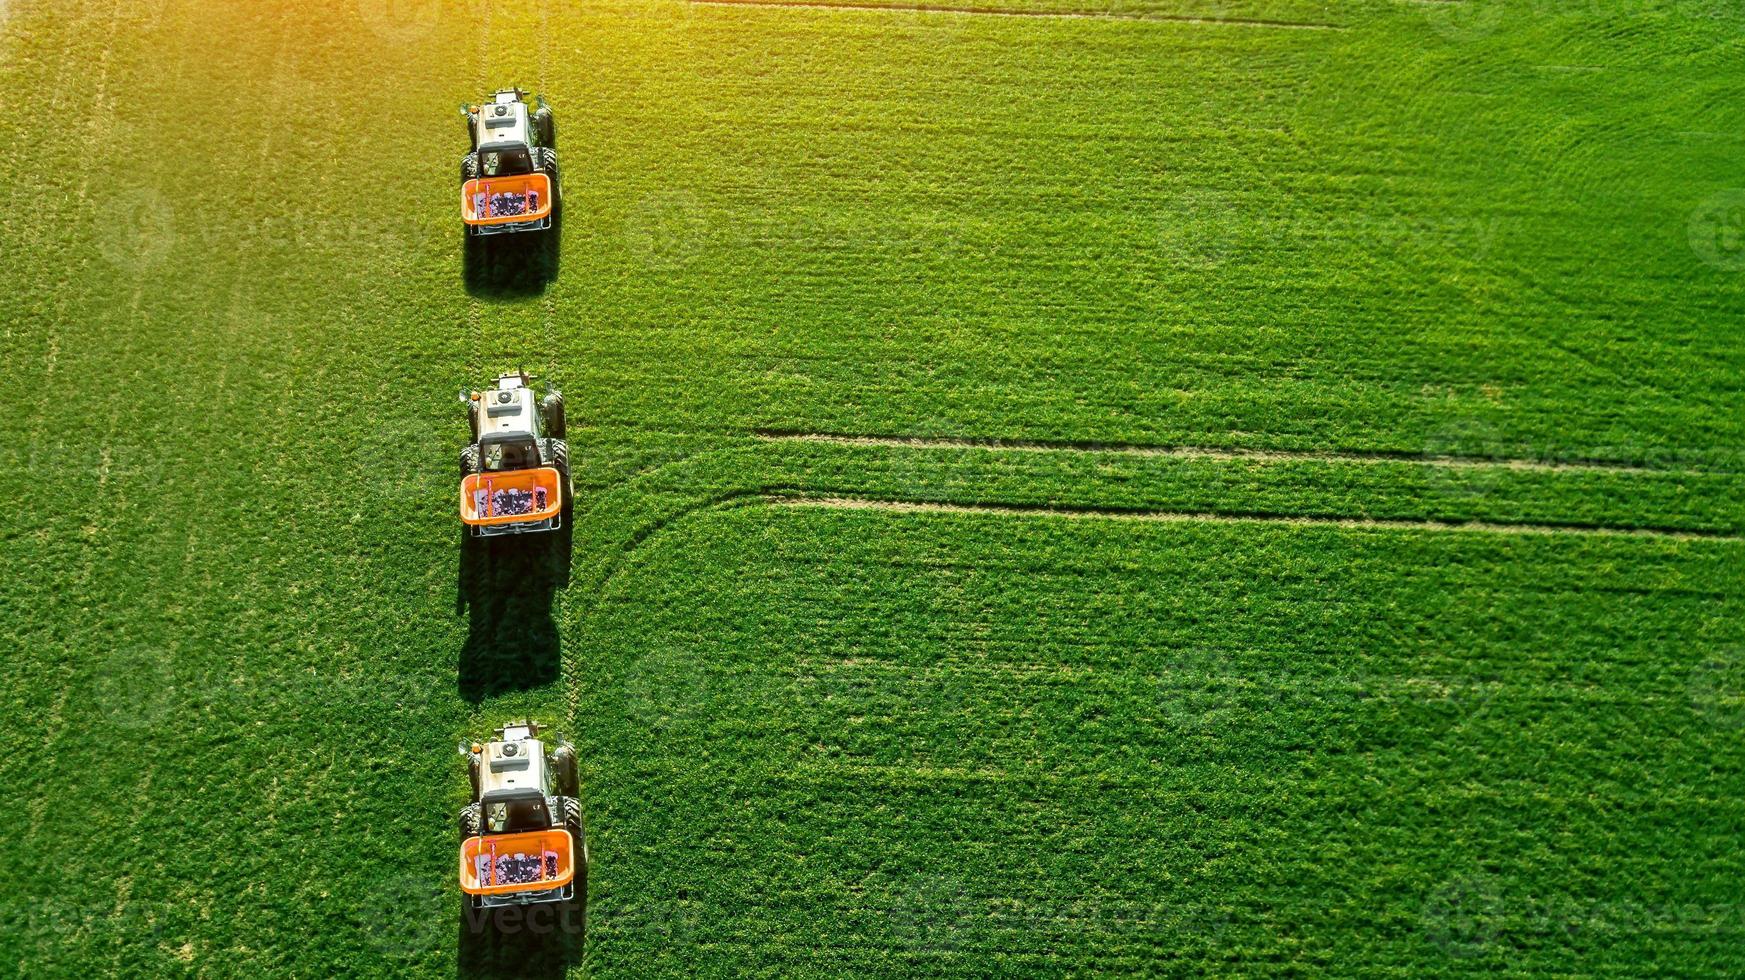 tractor makes fertilizer on the field. Top view photo